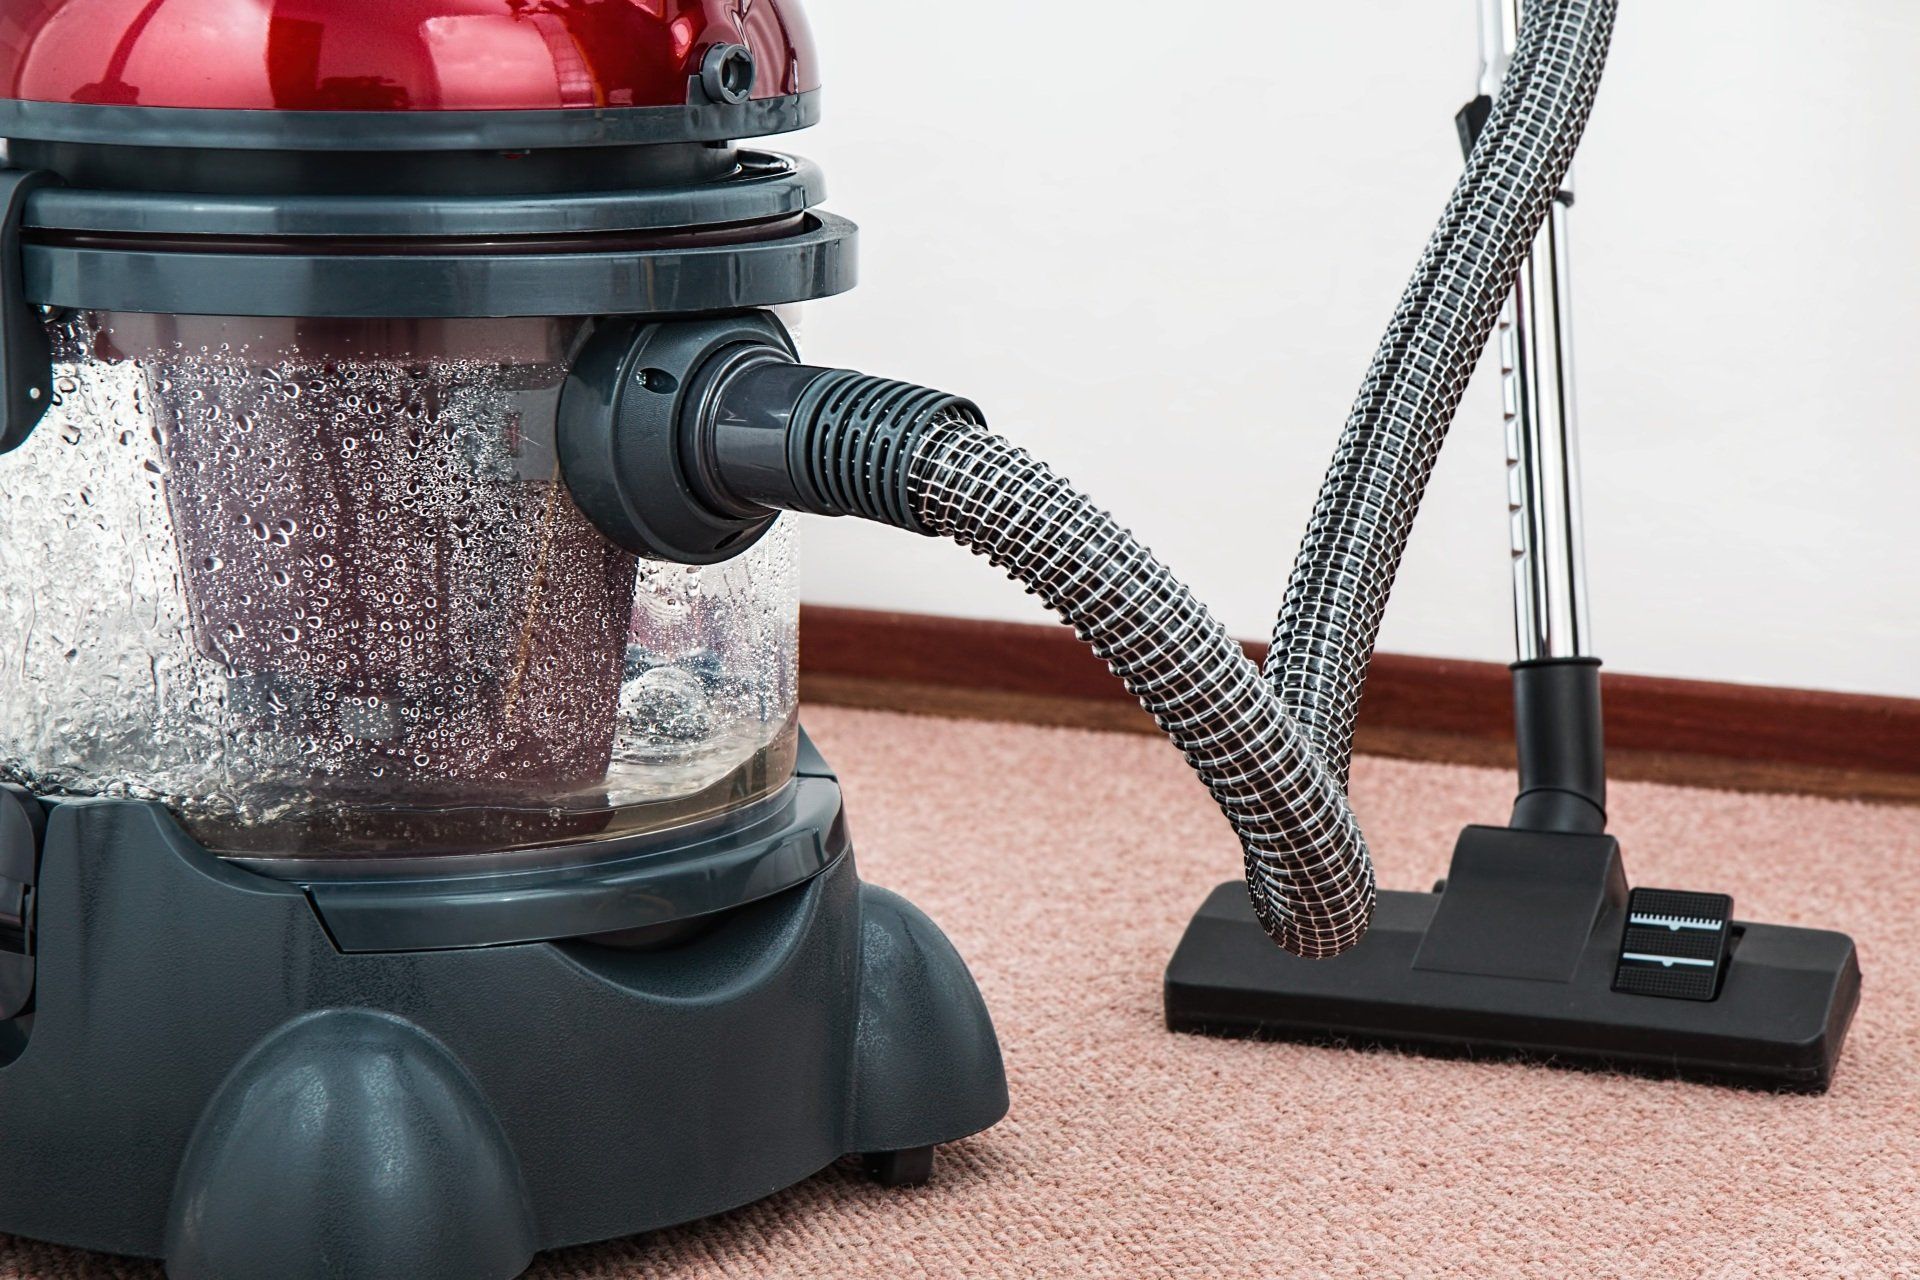 Restore Carpet Cleaning Service in Blythewood, Sumter & Columbia, SC